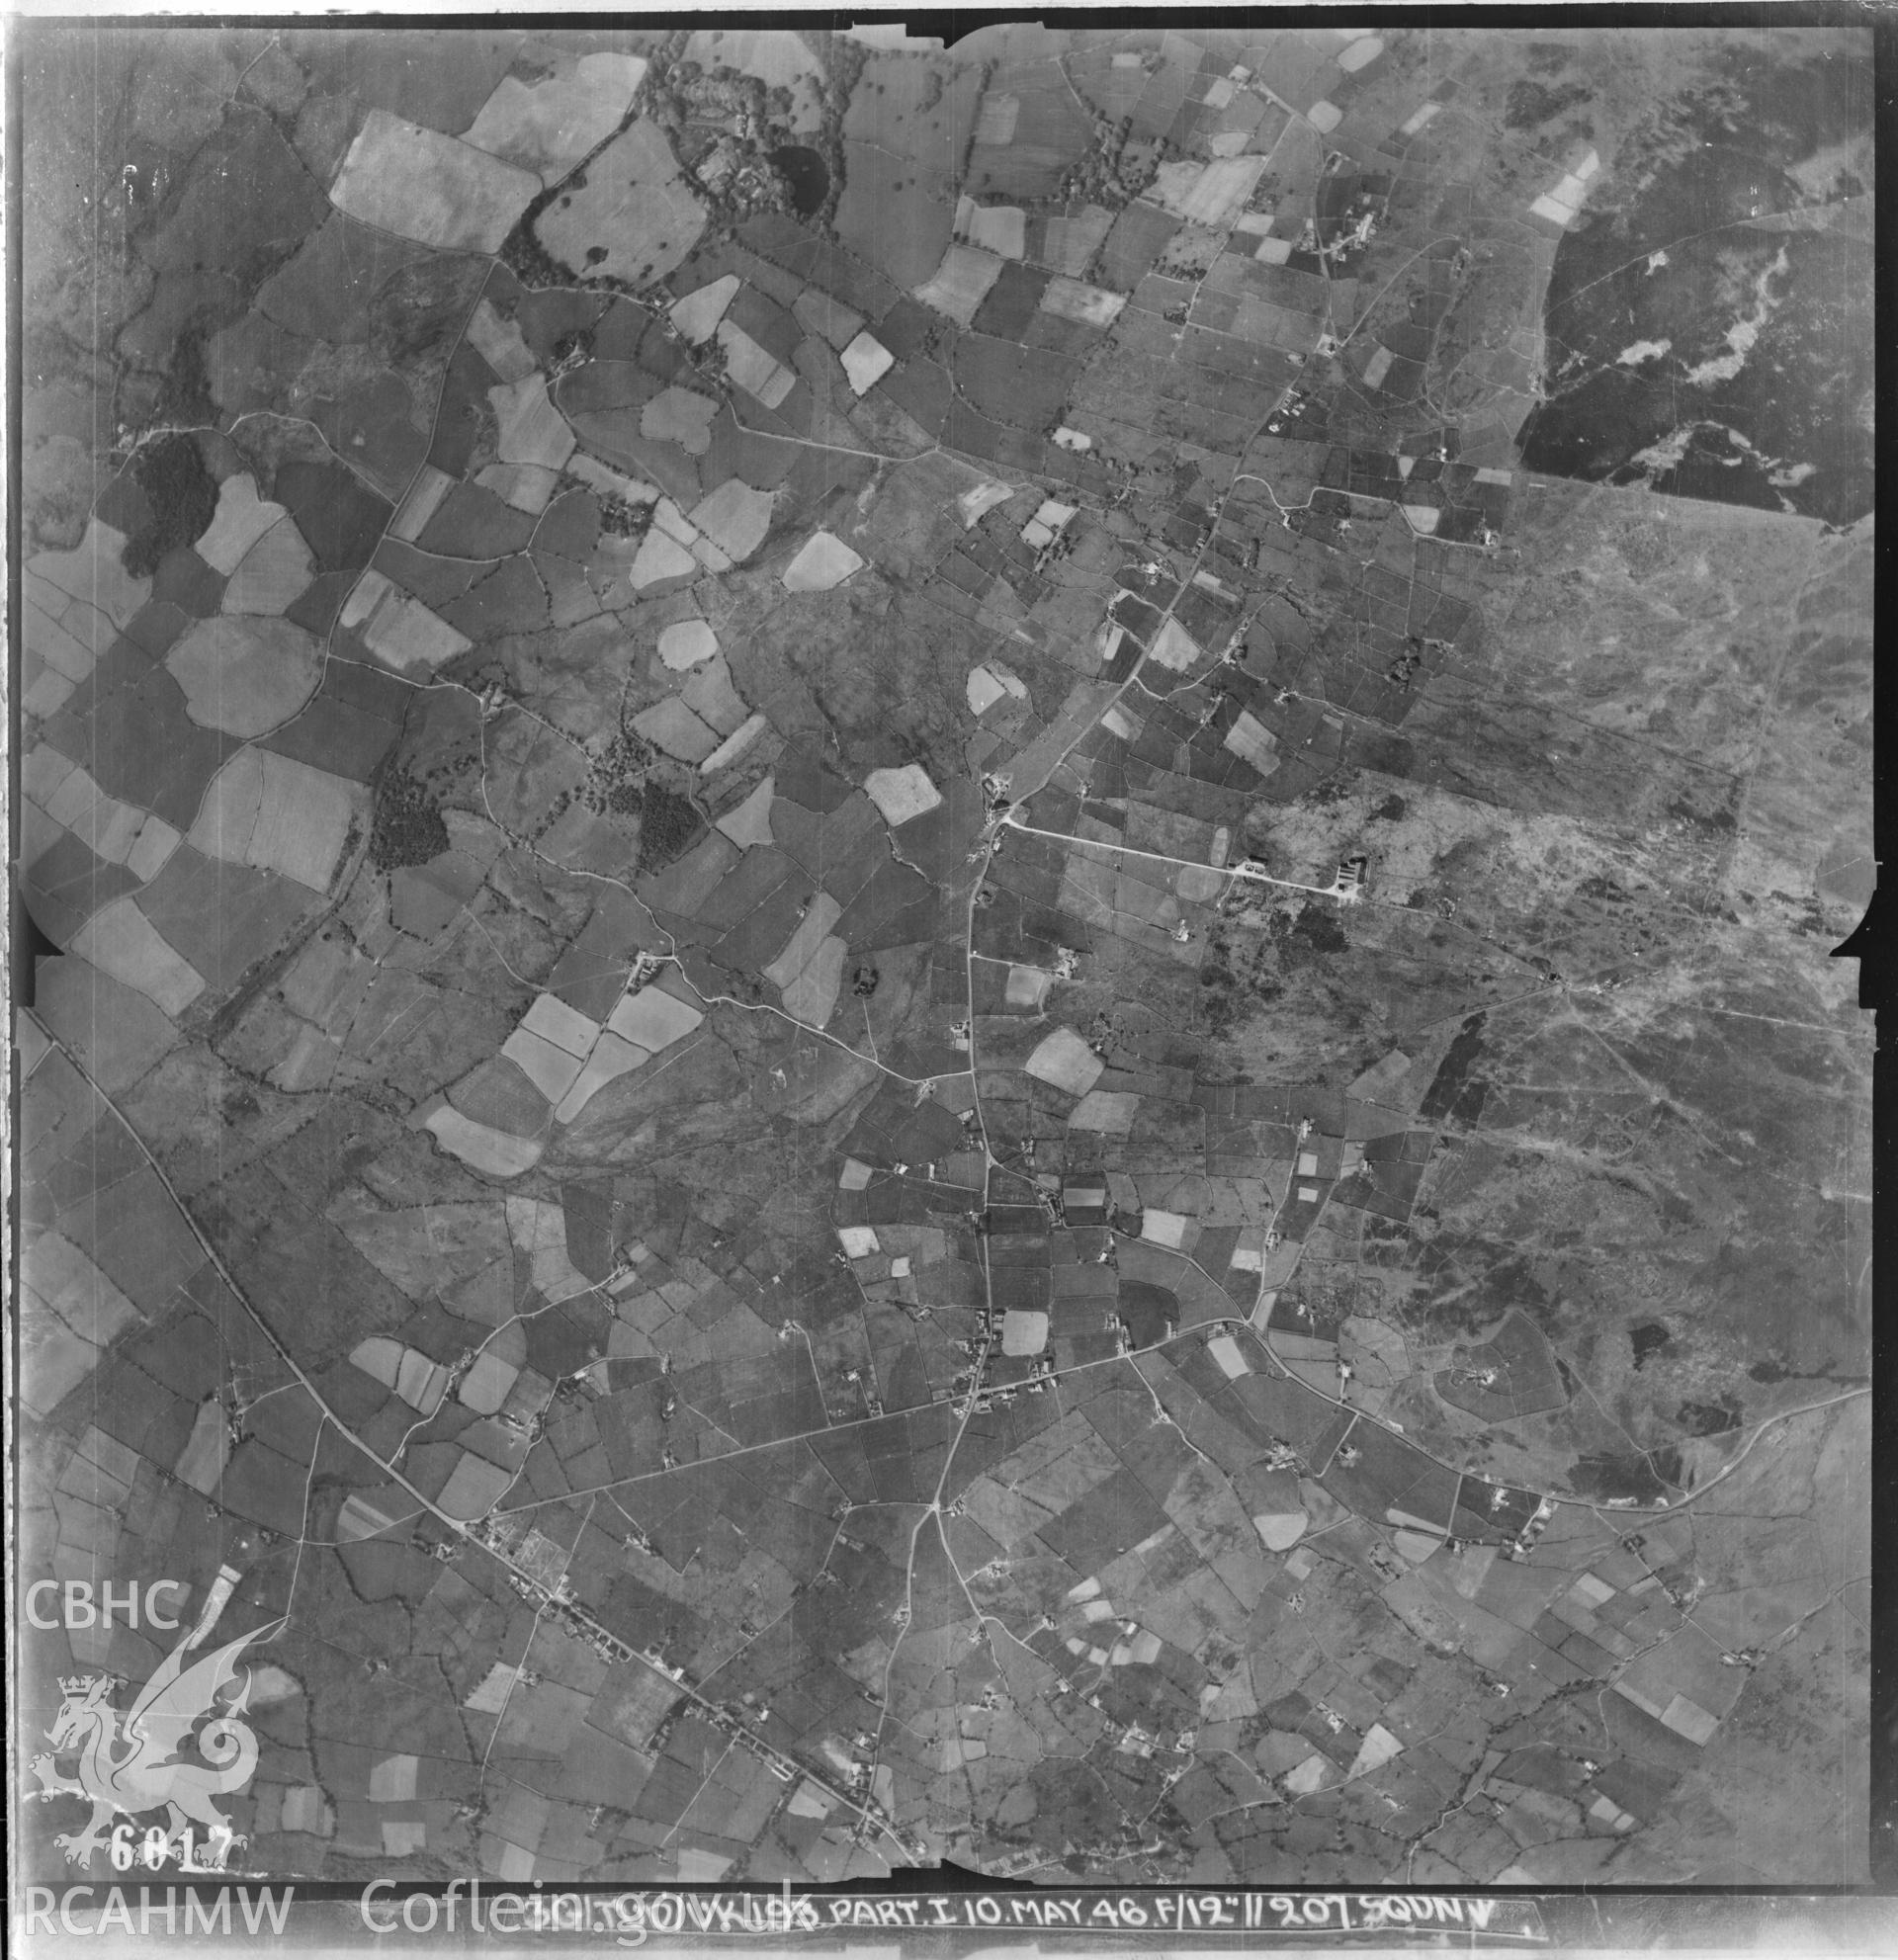 Digital copy of an aerial view of the Ceunant area SH5366 6122 taken by RAF 1946.